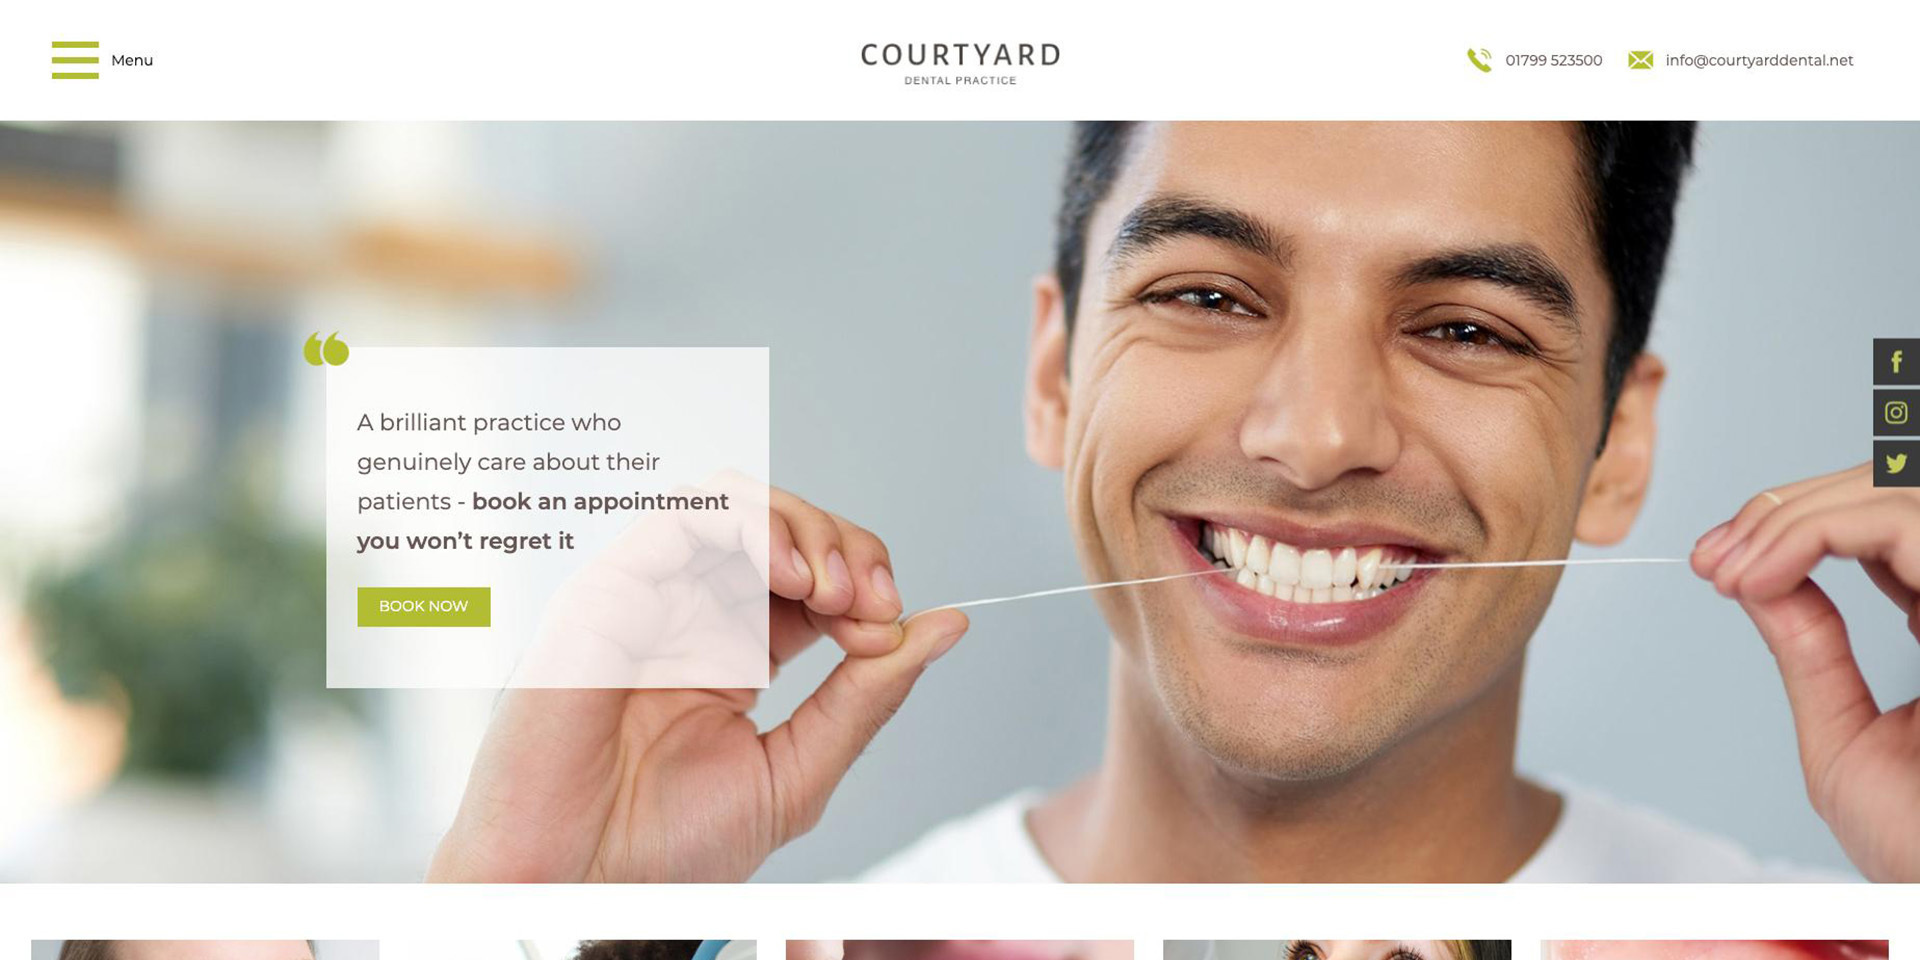 The new Courtyard website from it'seeze